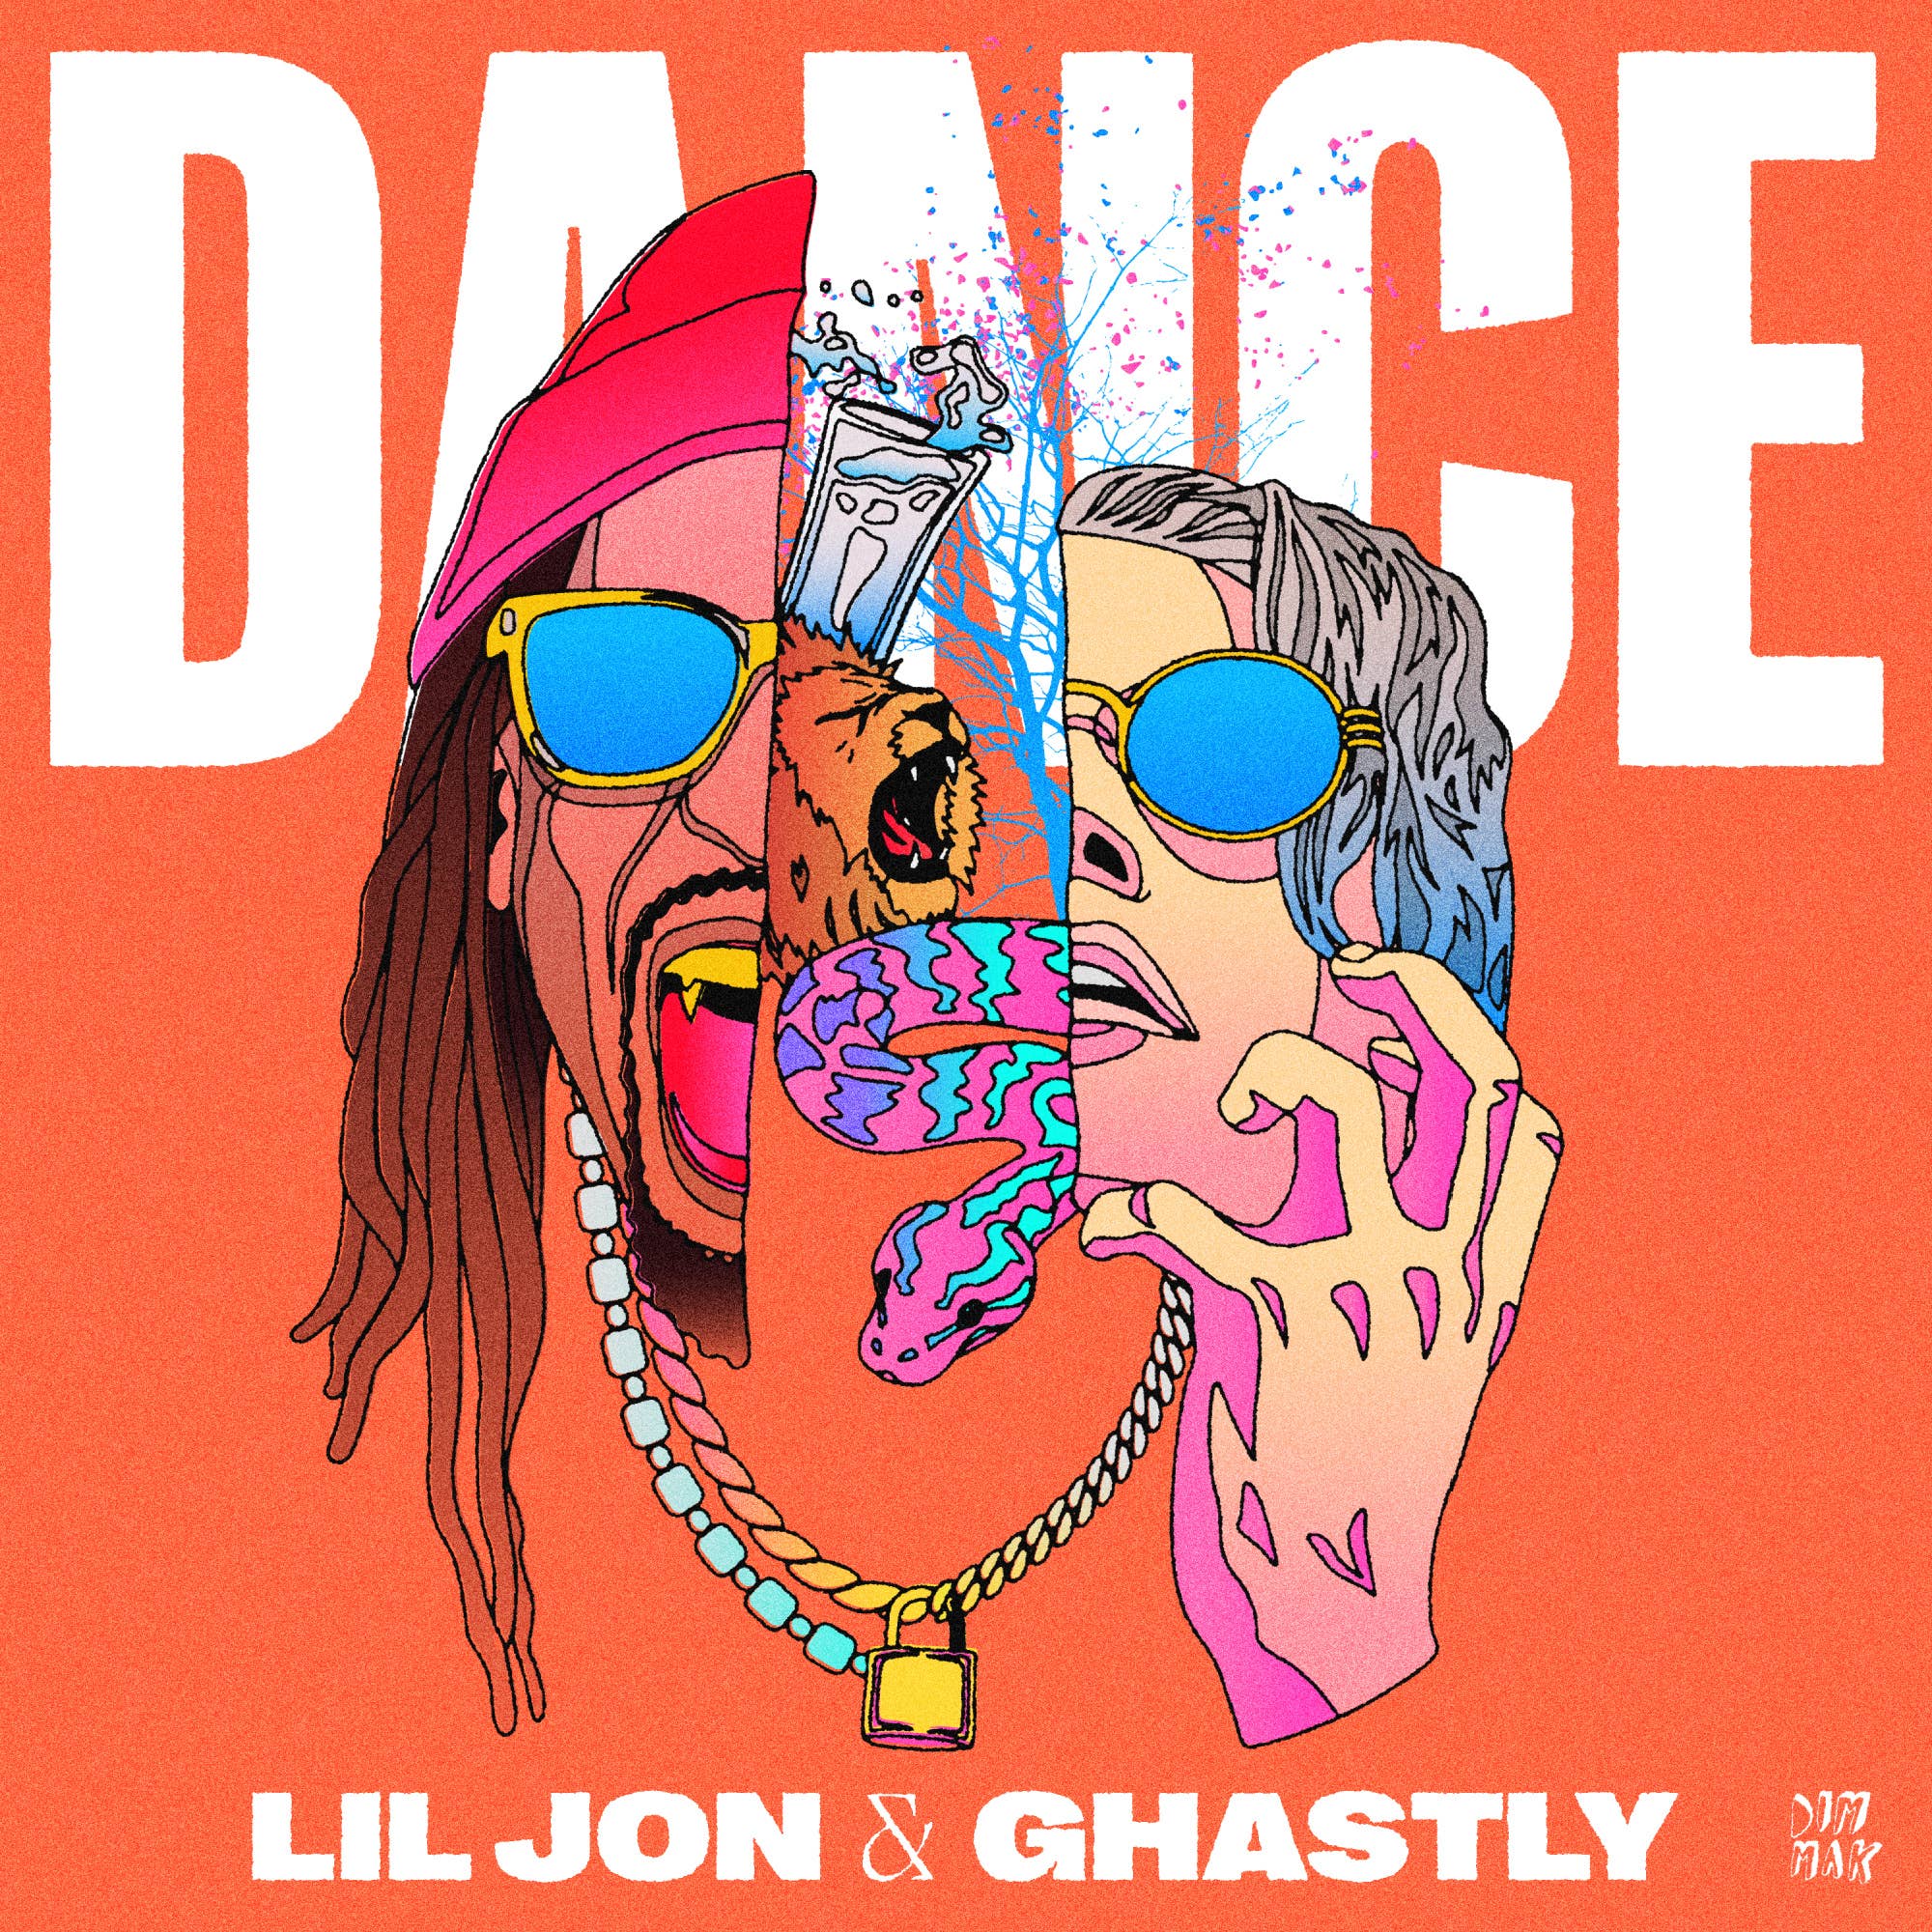 Premiere: Lil Jon and Ghastly Link Up for New Song Dance